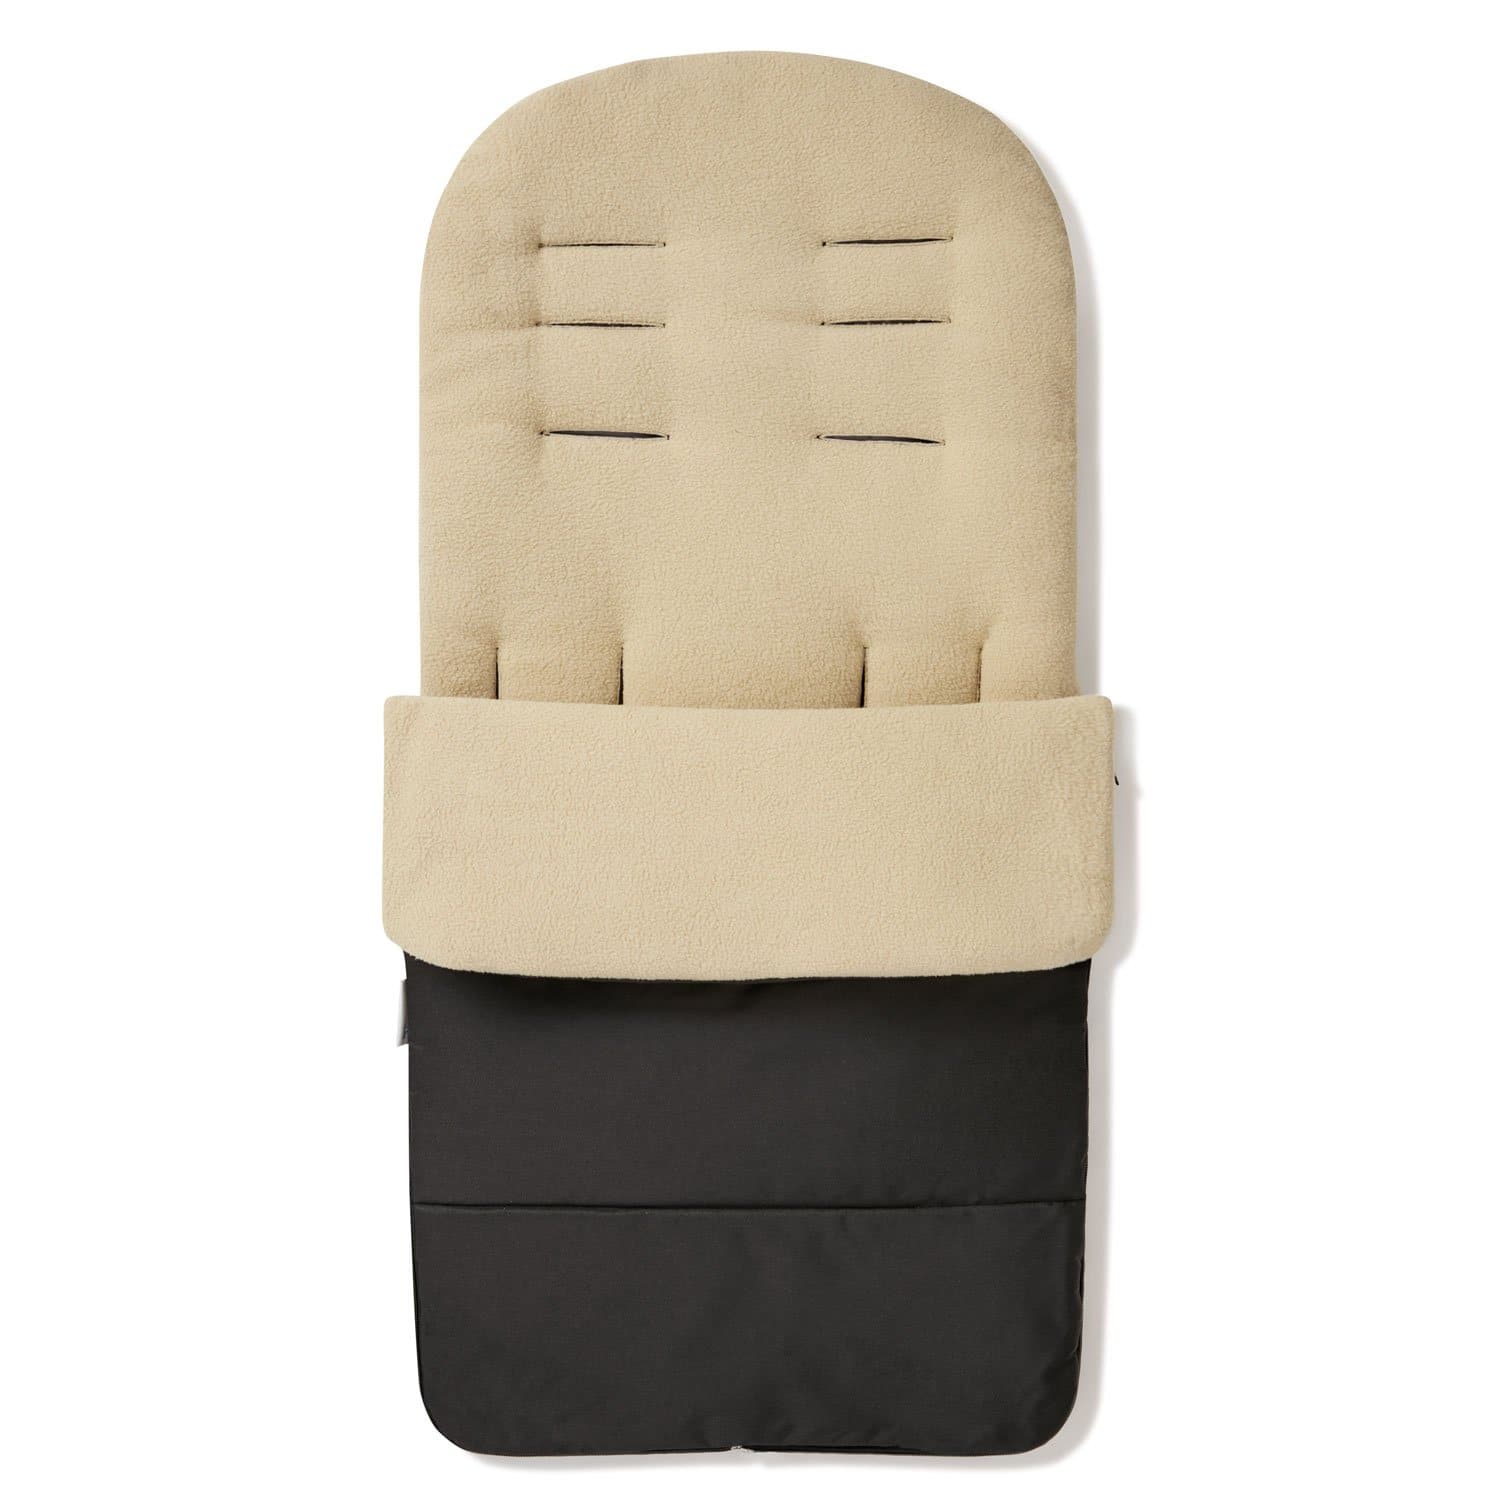 Premium Footmuff / Cosy Toes Compatible with Britax - Desert Sand / Fits All Models | For Your Little One